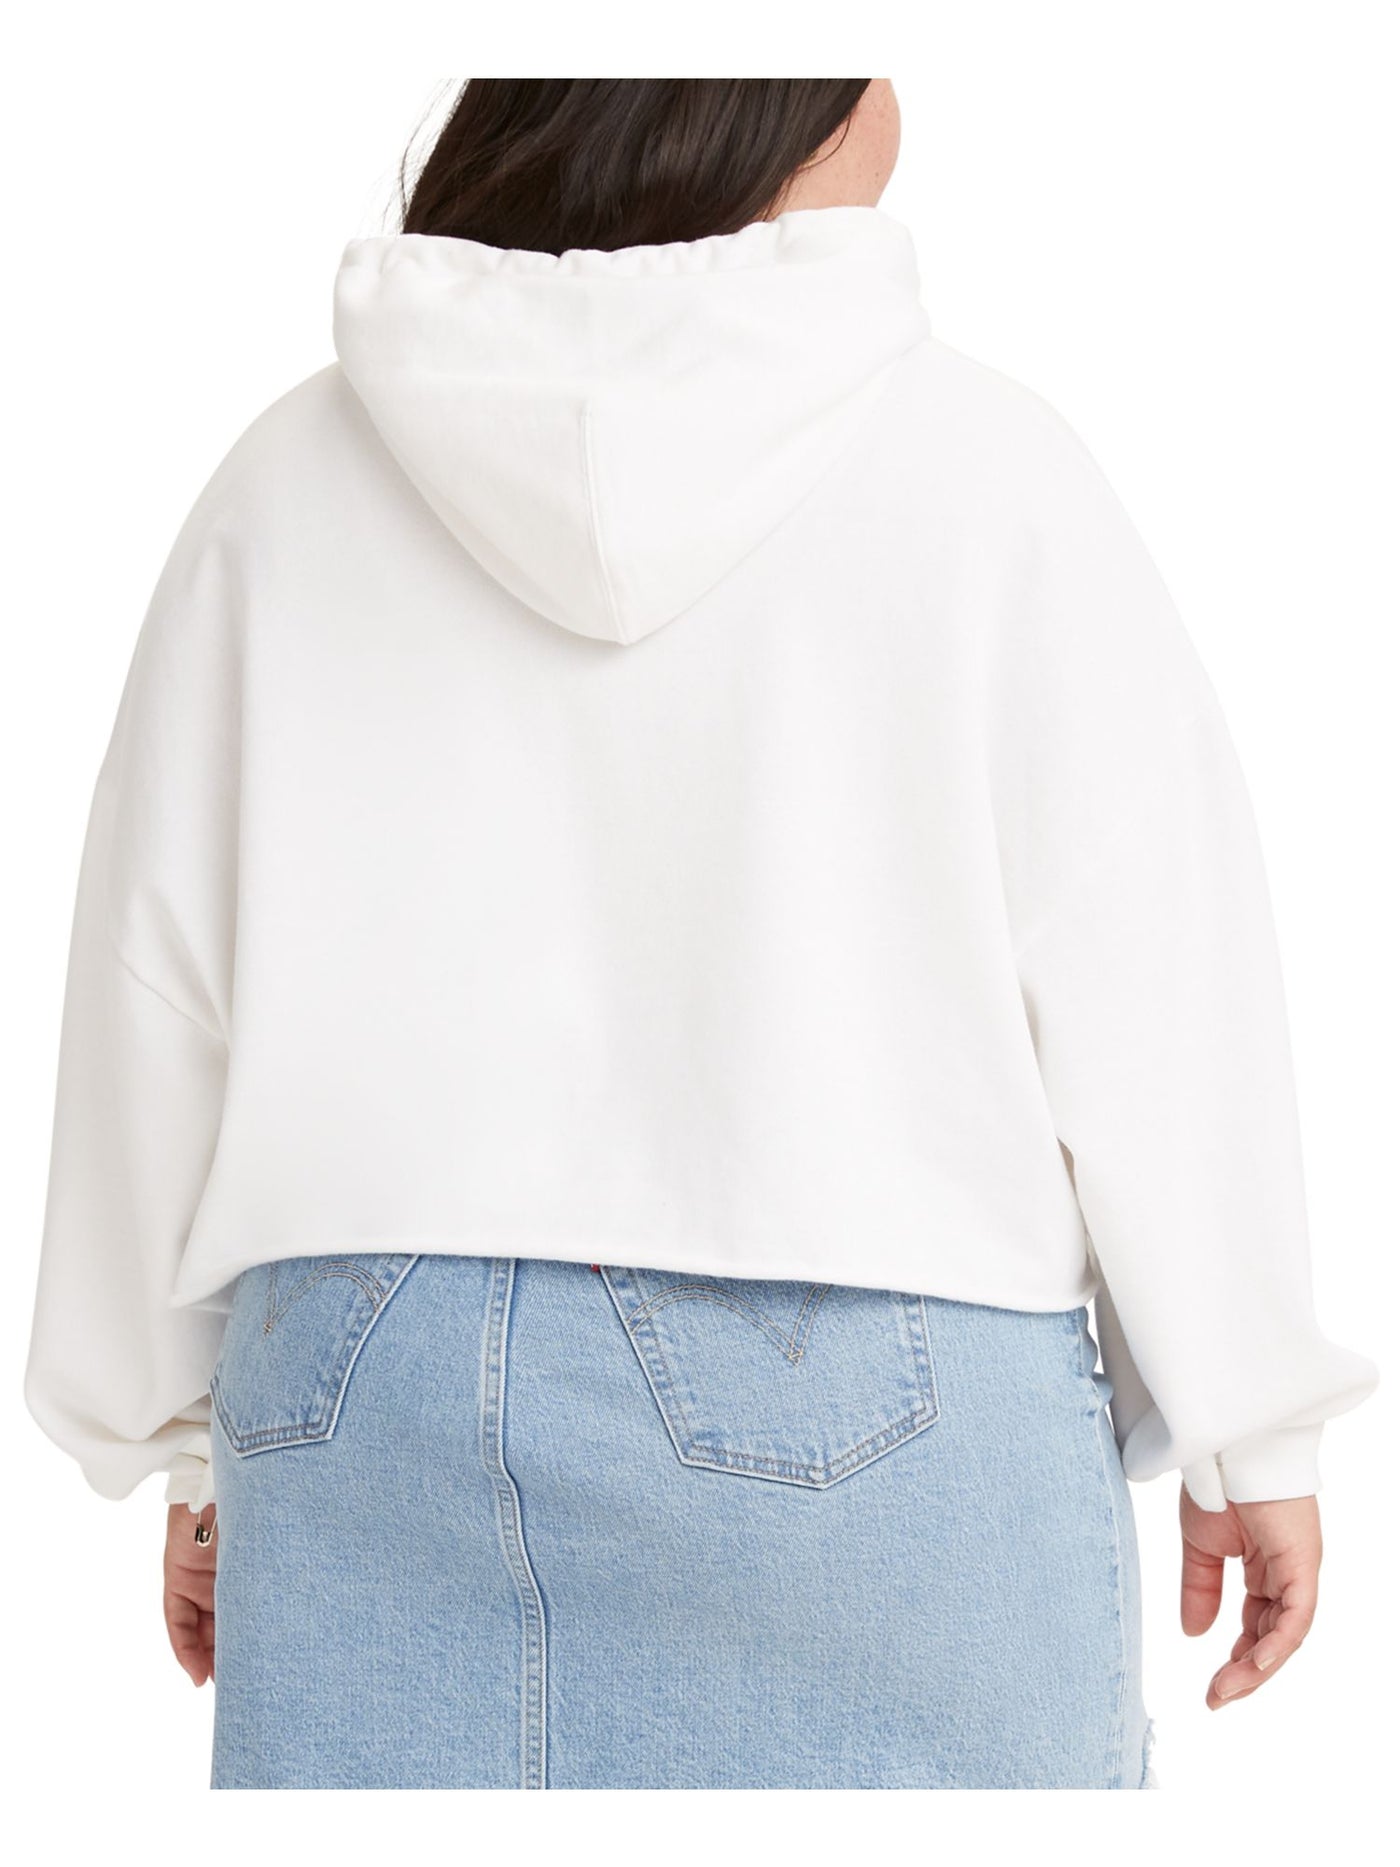 LEVI'S Womens White Tie Ribbed Cropped Drawstring Long Sleeve Collarless Hoodie Top 2X